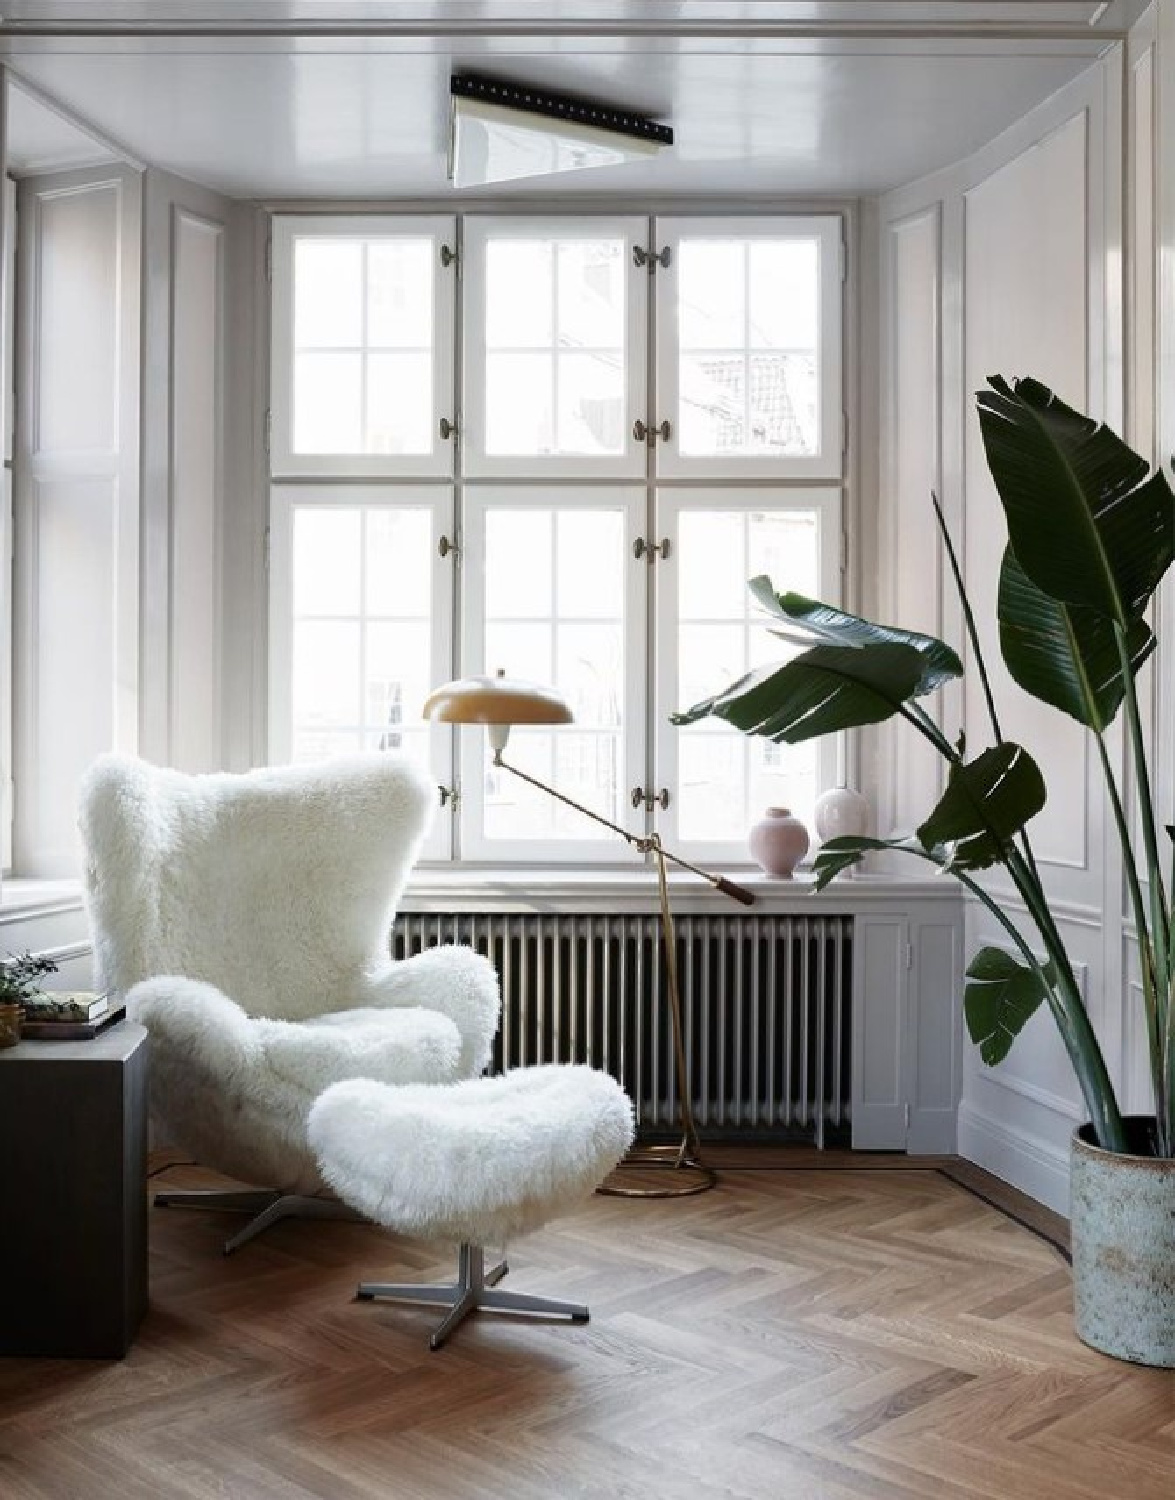 Shearling covered modern egg chair and ottoman in a sunny corner of a Stockholm apartment - @elledecorationfr #stockholmapartment #eggchairs